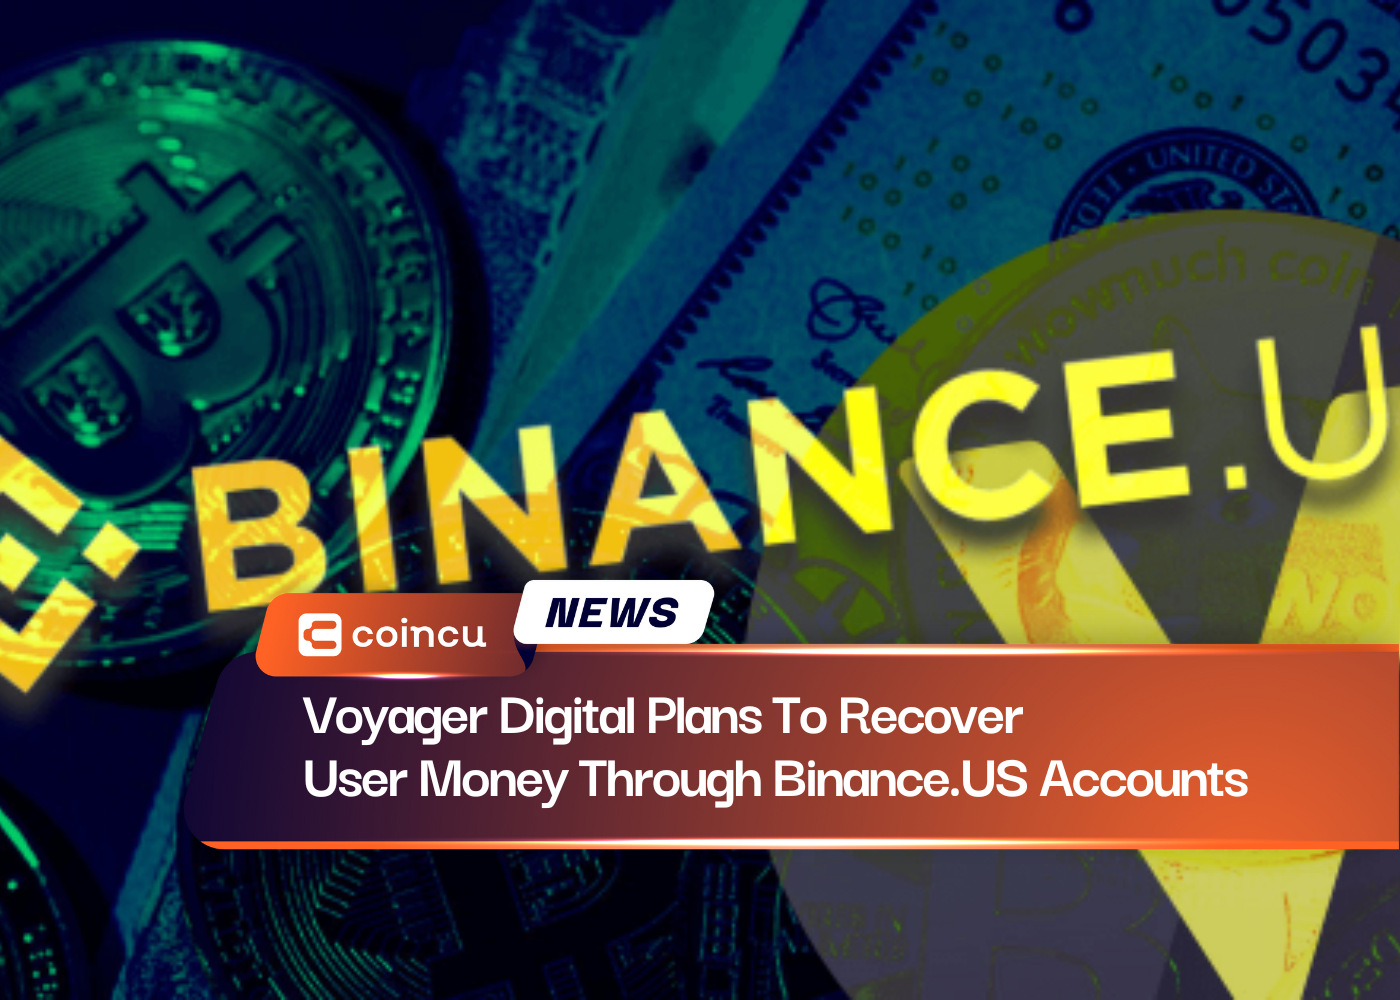 Voyager Digital Plans To Recover User Money Through Binance.US Accounts